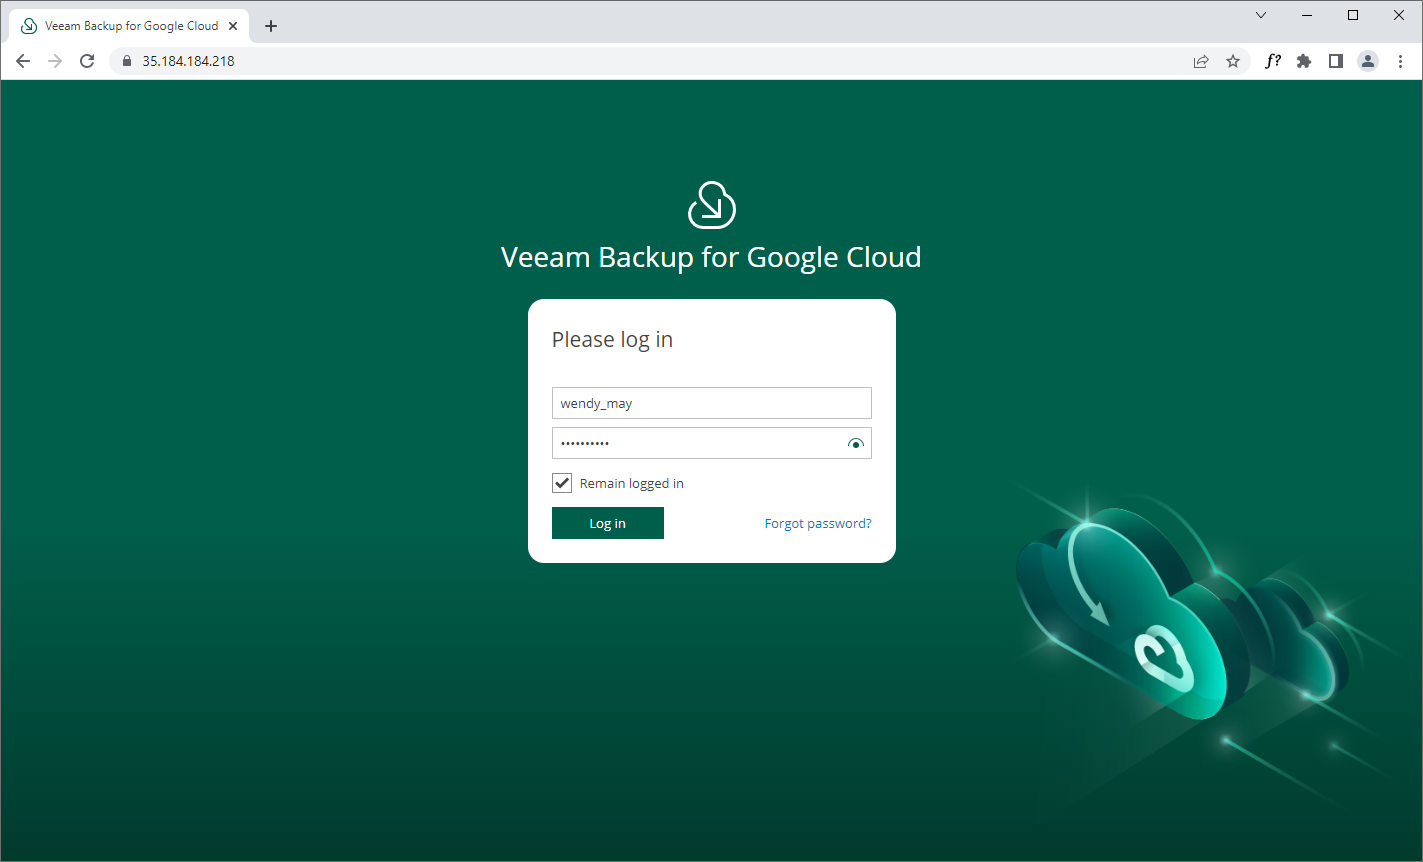 Accessing Veeam Backup for GCP